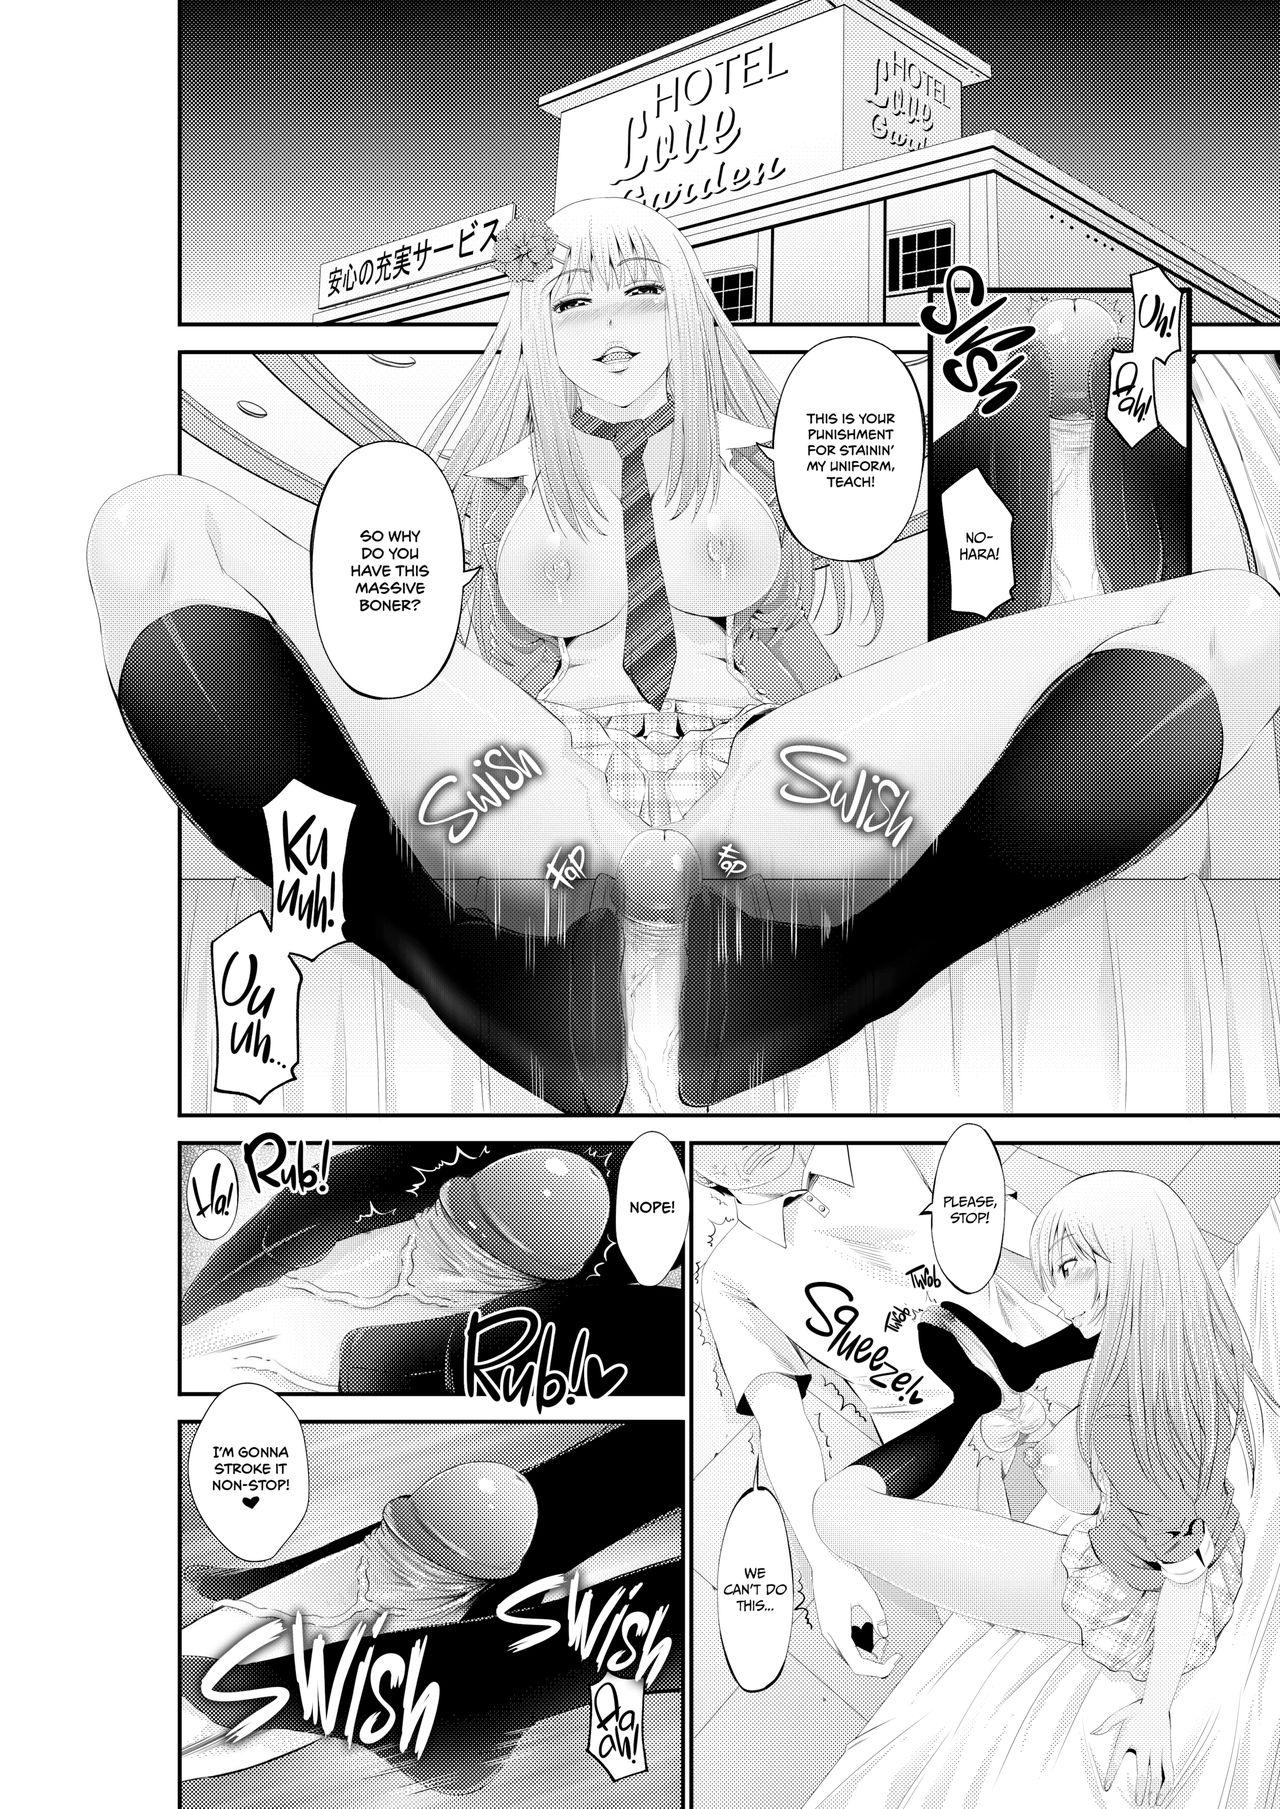 Special Love Hotel Sex Counseling: My Teacher's a Real Sex Machine! 12